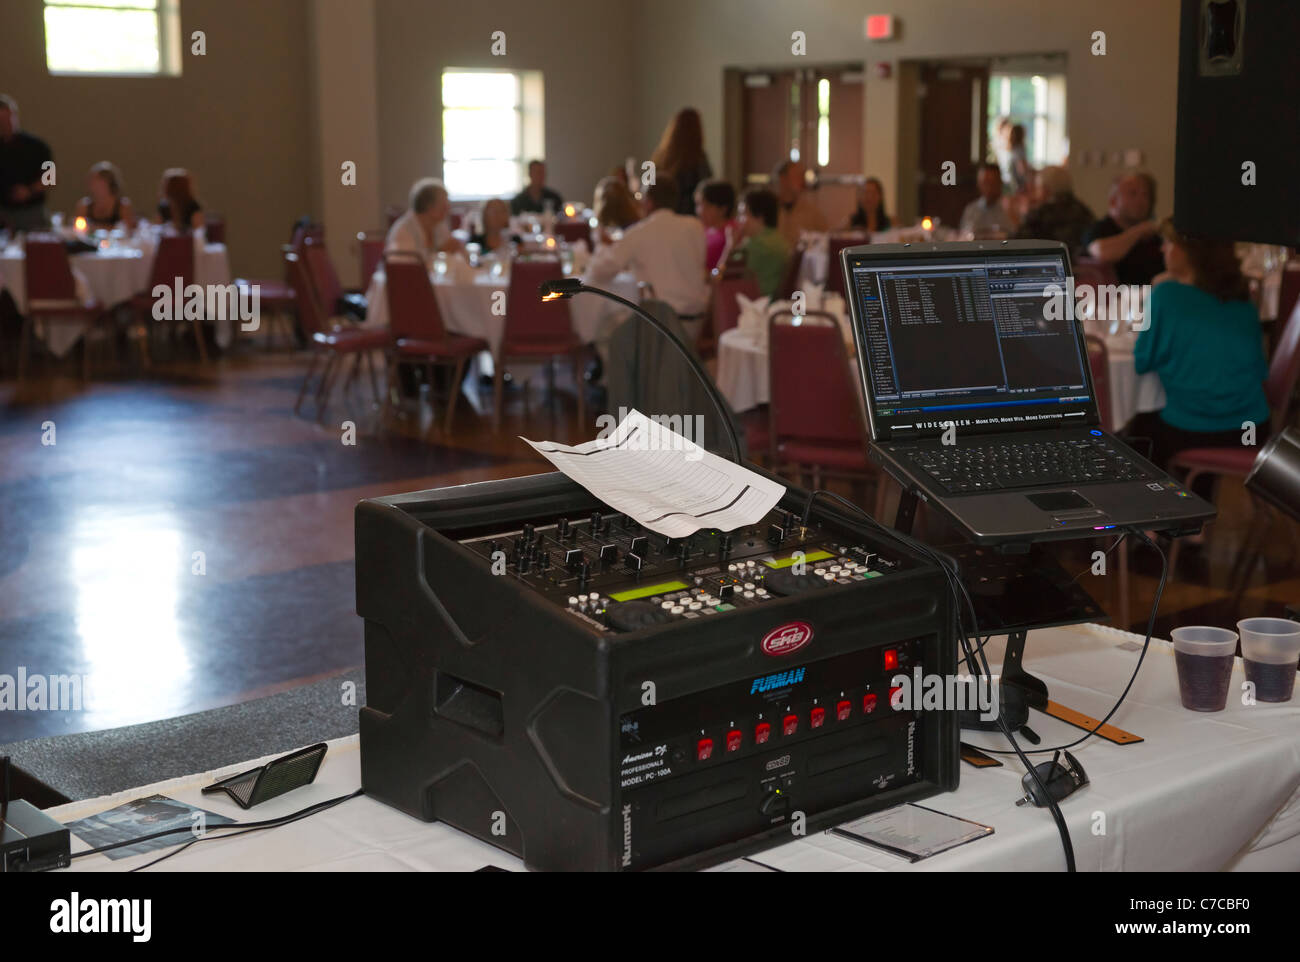 Disc jokey console,mixer and laptop set up during wedding reception ceremony with guests in the background Stock Photo